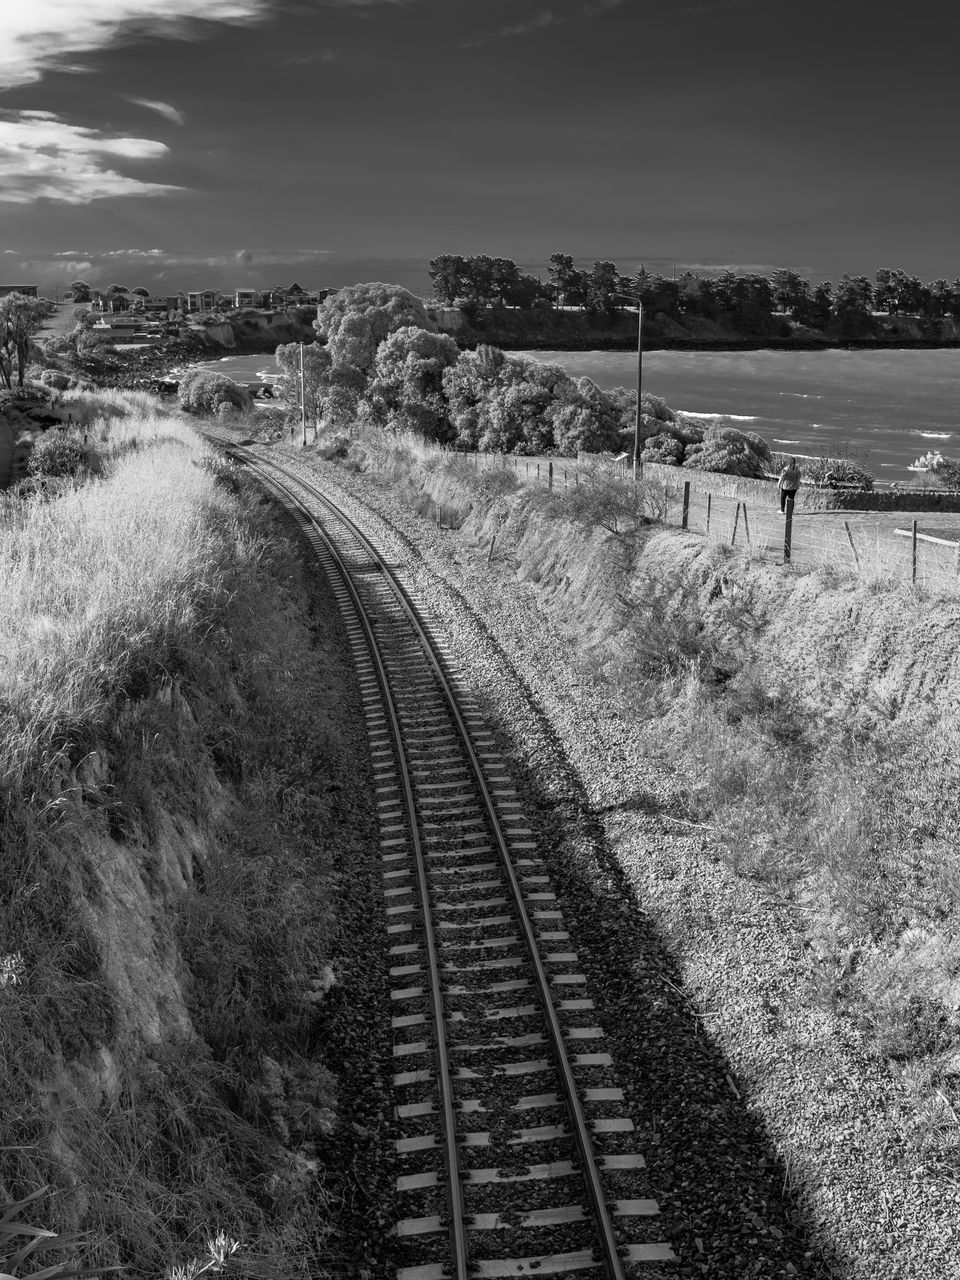 track, railroad track, rail transportation, transportation, black and white, sky, transport, monochrome, nature, railway, monochrome photography, plant, mode of transportation, cloud, the way forward, no people, day, travel, outdoors, land, tree, public transportation, landscape, vehicle, environment, vanishing point, high angle view, diminishing perspective, sunlight